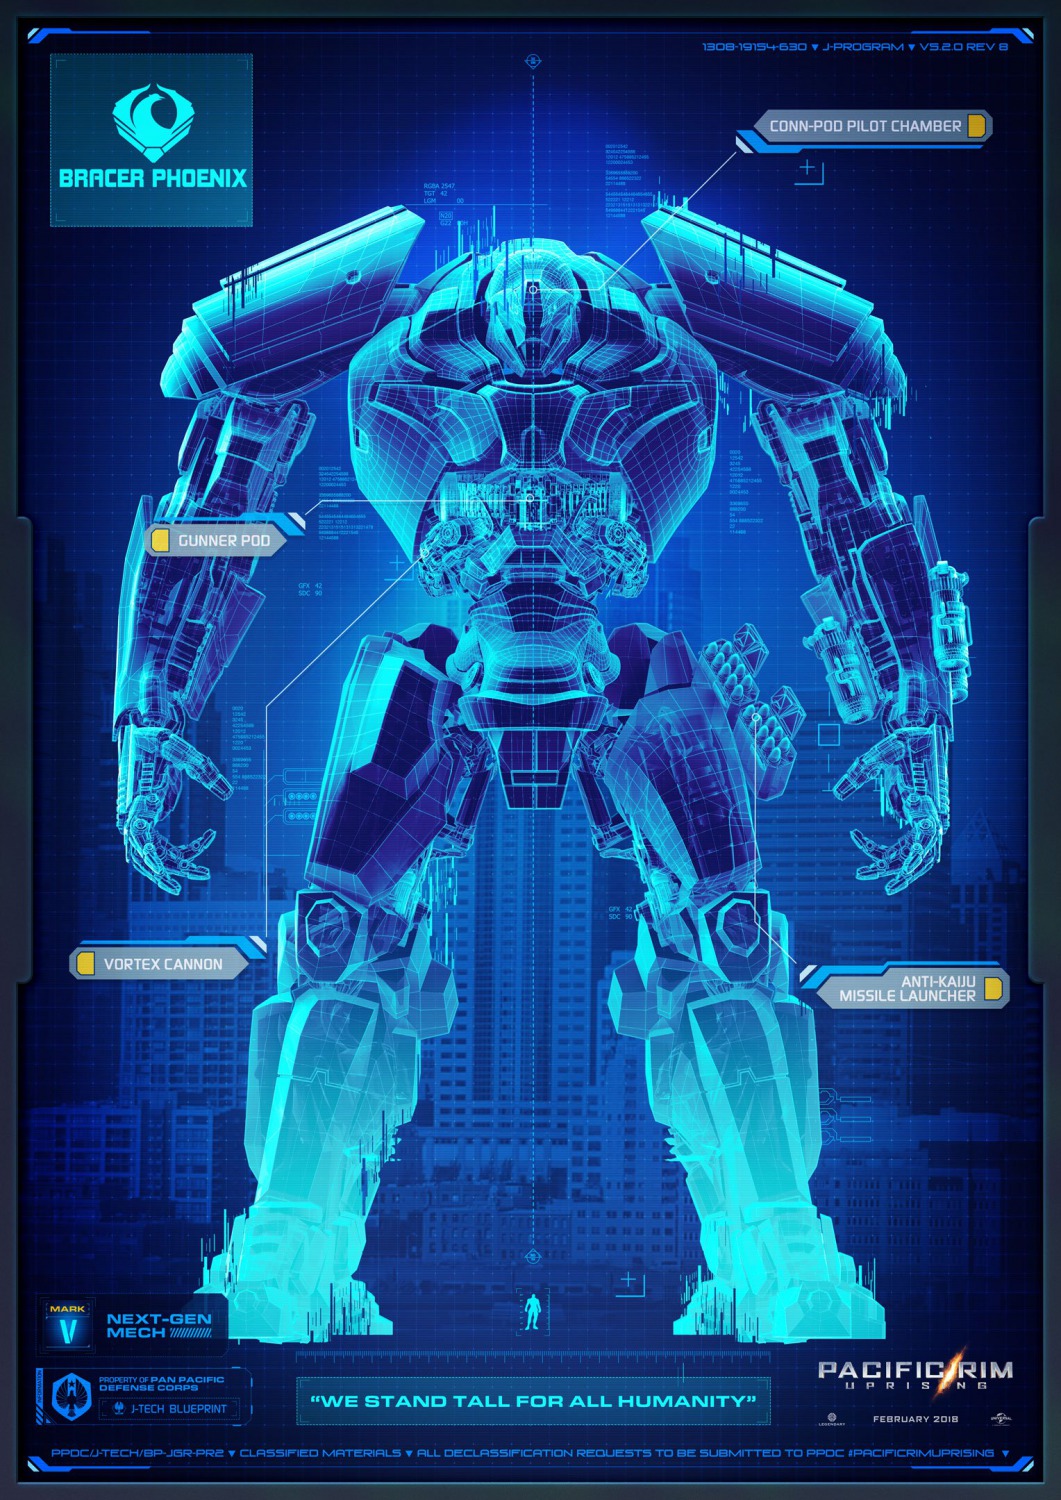 Extra Large Movie Poster Image for Pacific Rim Uprising (#5 of 49)